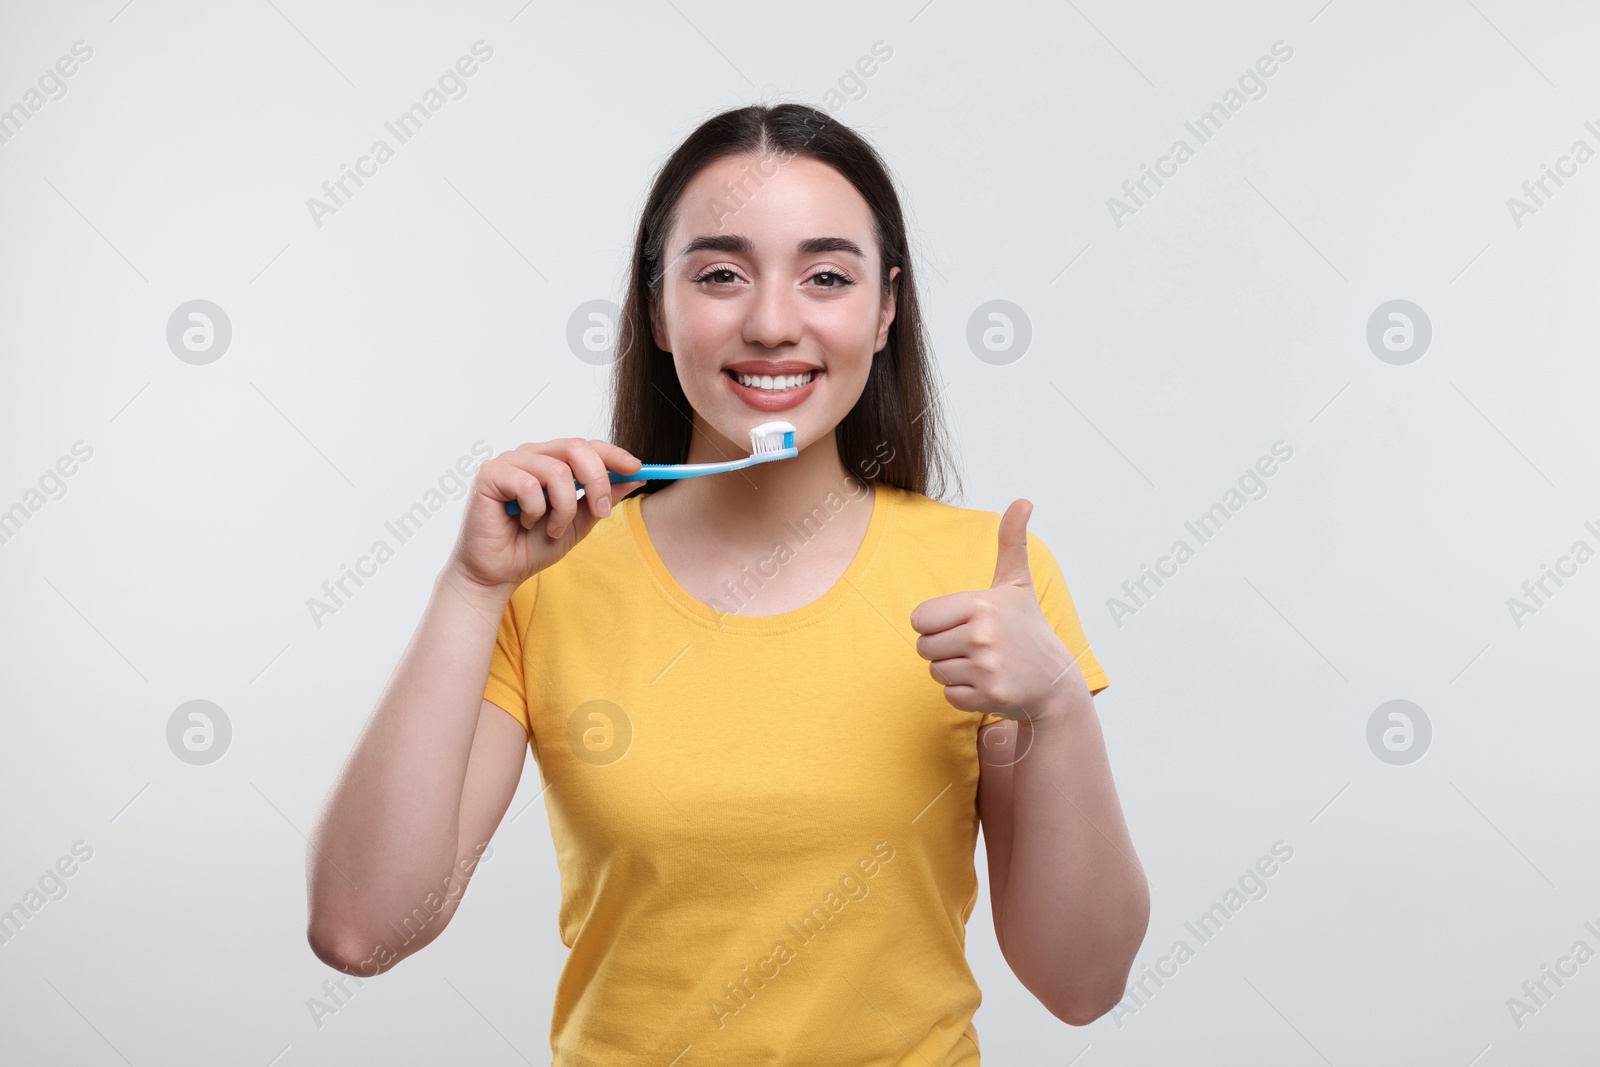 Photo of Happy young woman holding plastic toothbrush and showing thumb up on white background